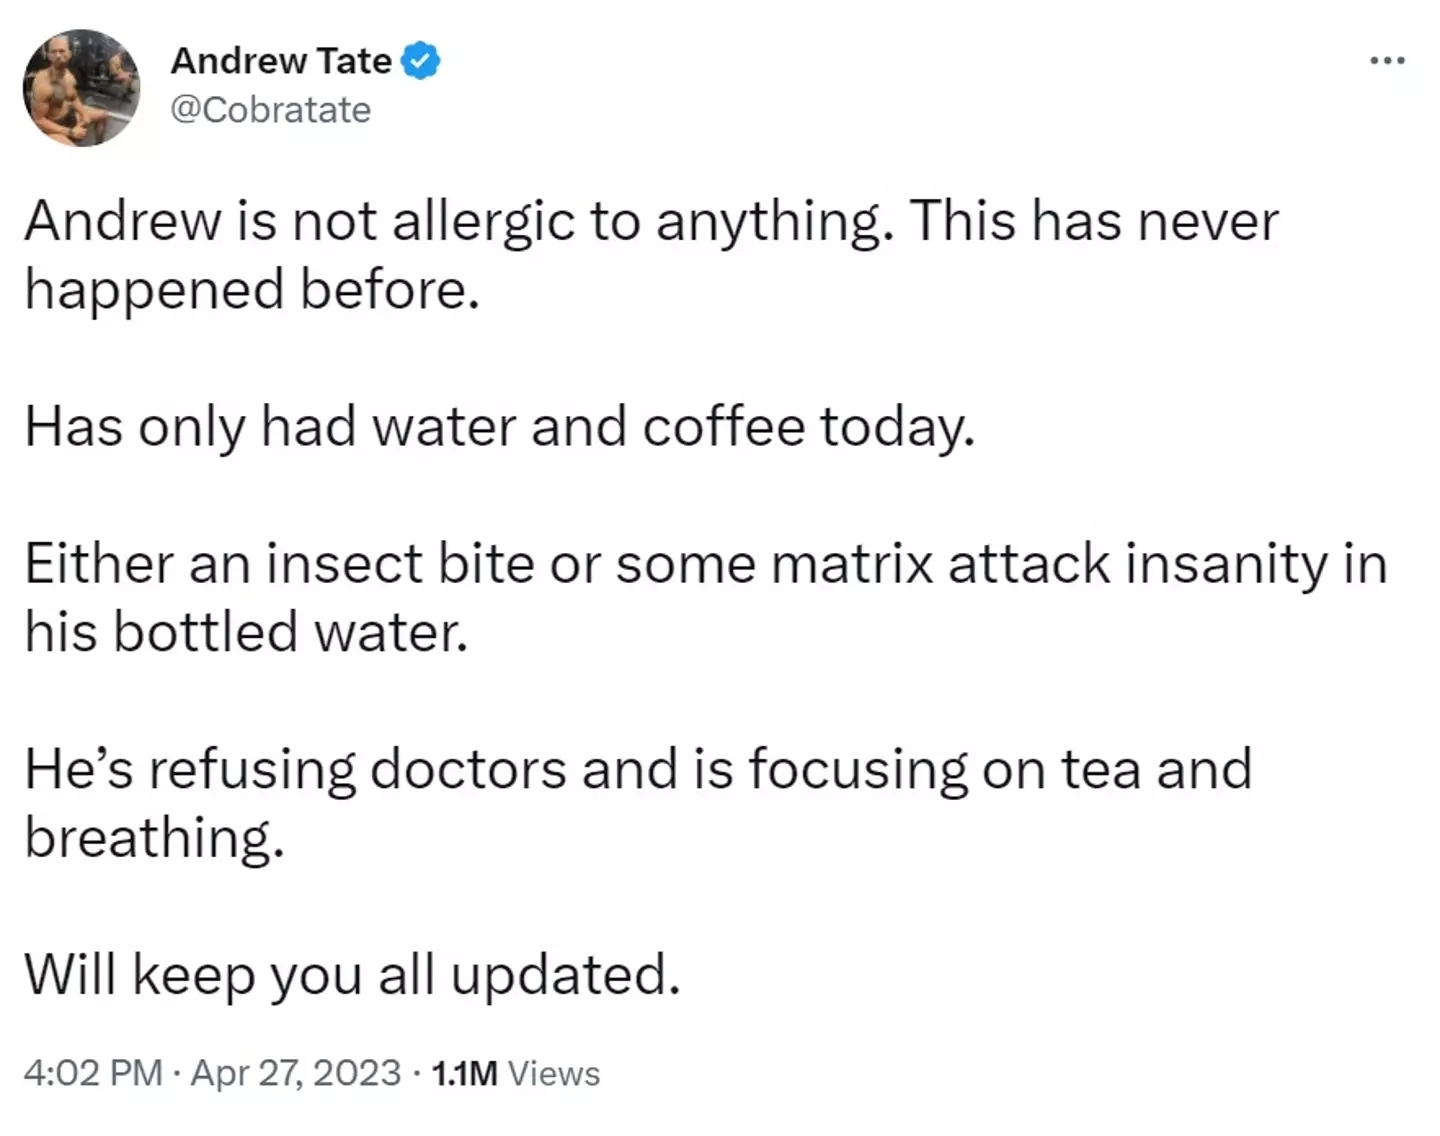 Someone using Tate's Twitter account said he was refusing doctors.